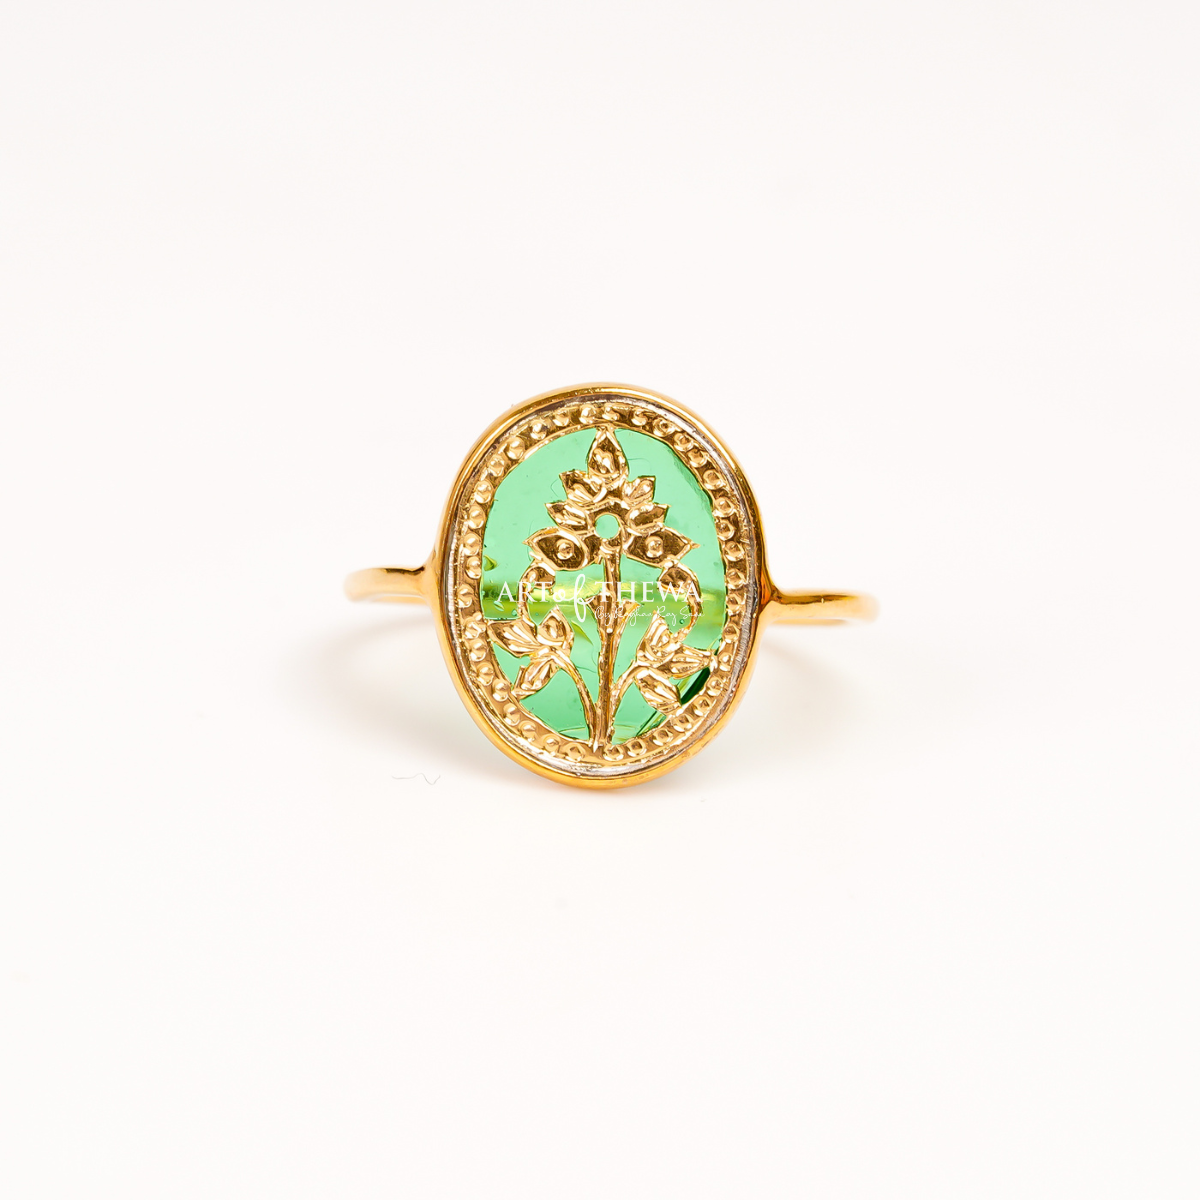 Exquisite Midori Thewa Art Ring - Handcrafted Luxury In Every Inch